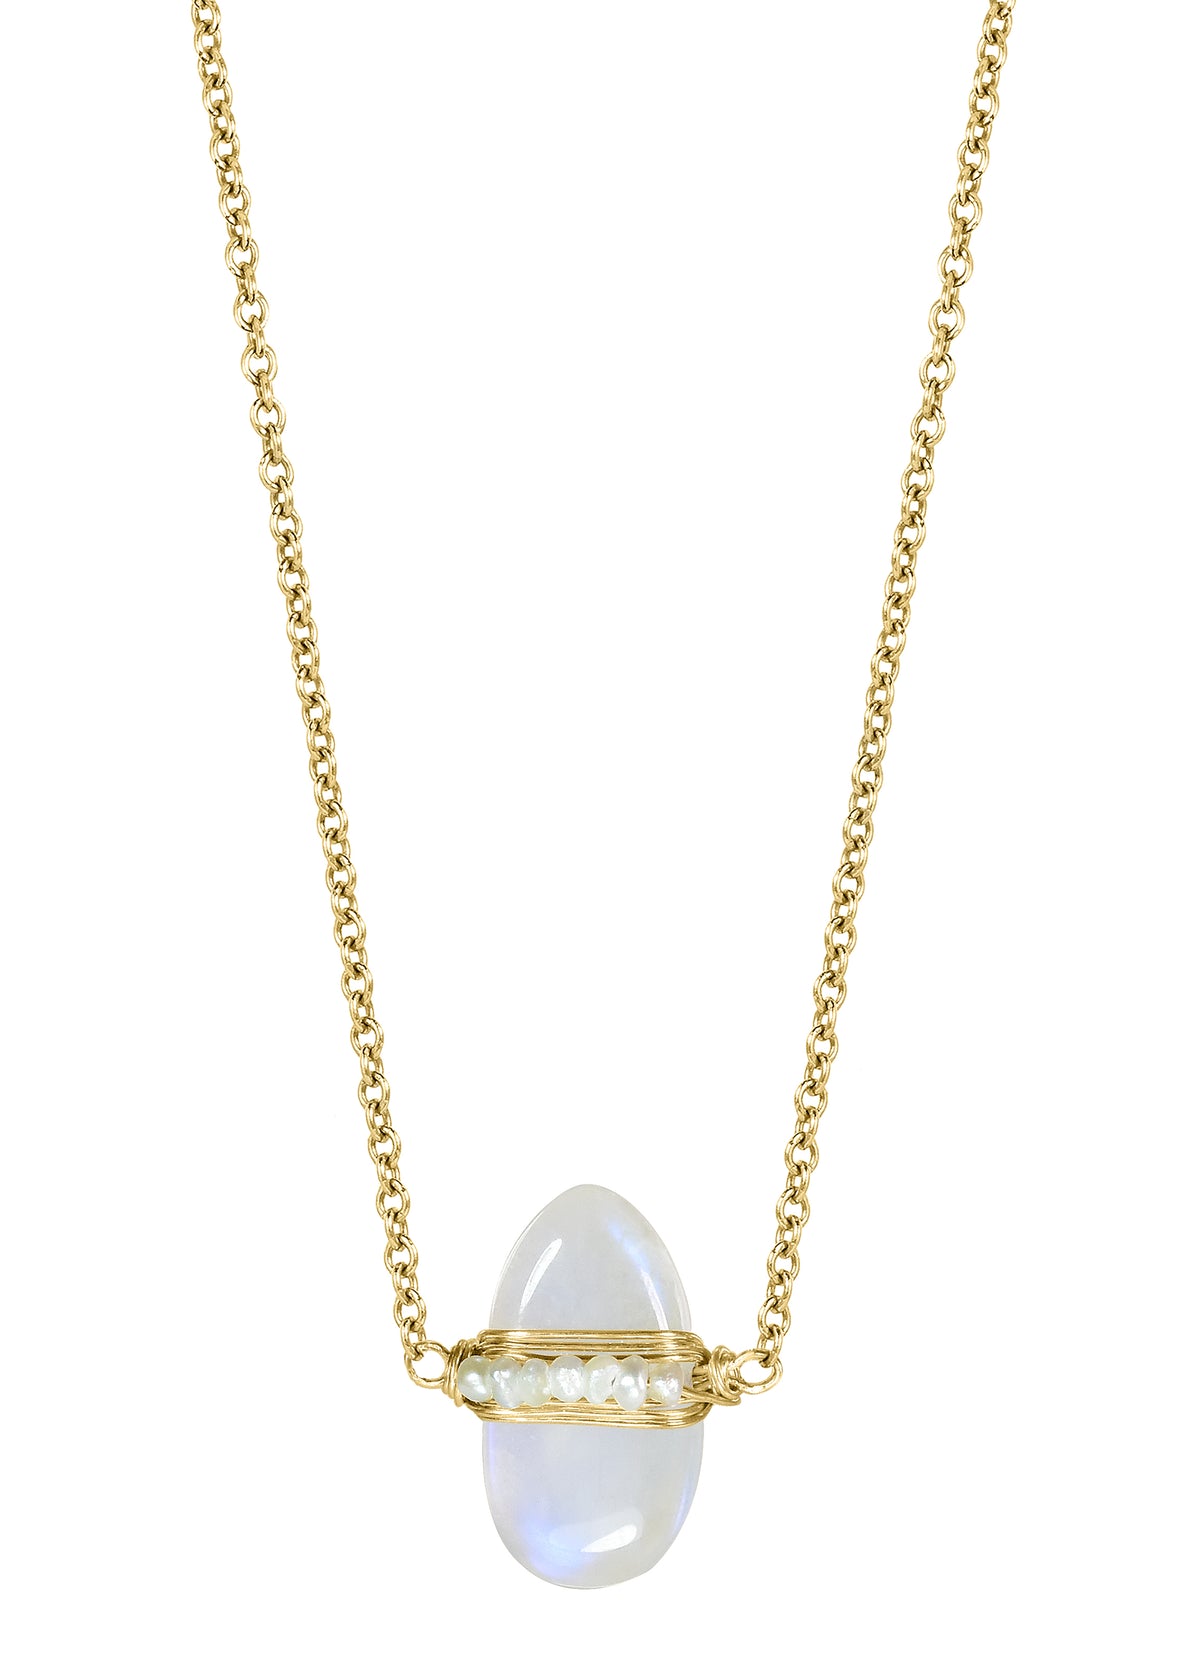 Rainbow moonstone Freshwater pearl 14k gold fill Necklace measures 16-1/4&quot; in length Pendant measures 1/2&quot; in length and 5/16&quot; in width at the widest point Handmade in our Los Angeles studio